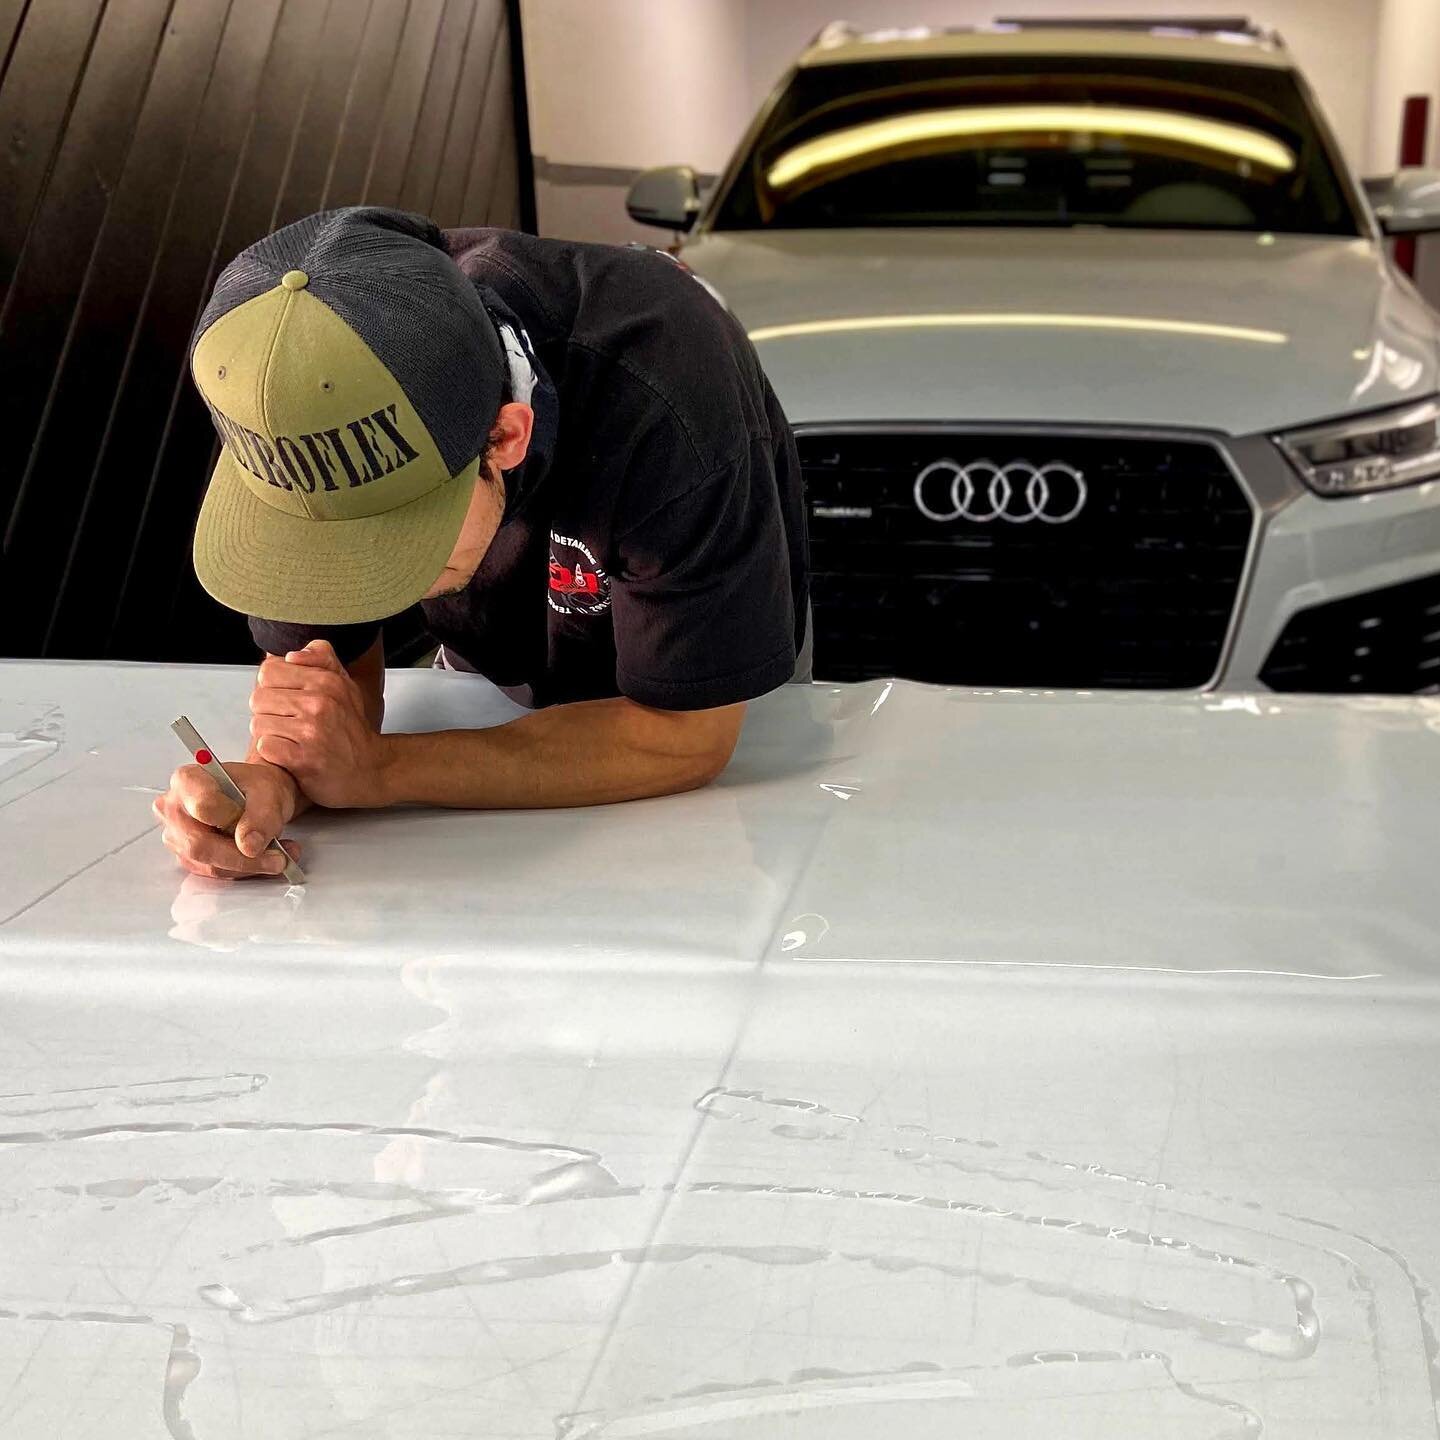 Get your Paint Protection Film installed at Top to Bottom Detailing! Call us at 951.775.7662 or come by &amp; visit us at our shop in Temecula!

☑️ Auto Shop
☑️ Ceramic Coatings // Paint Corrections // Paint Protection Films // Tint
☑️ Cars, Trucks, 